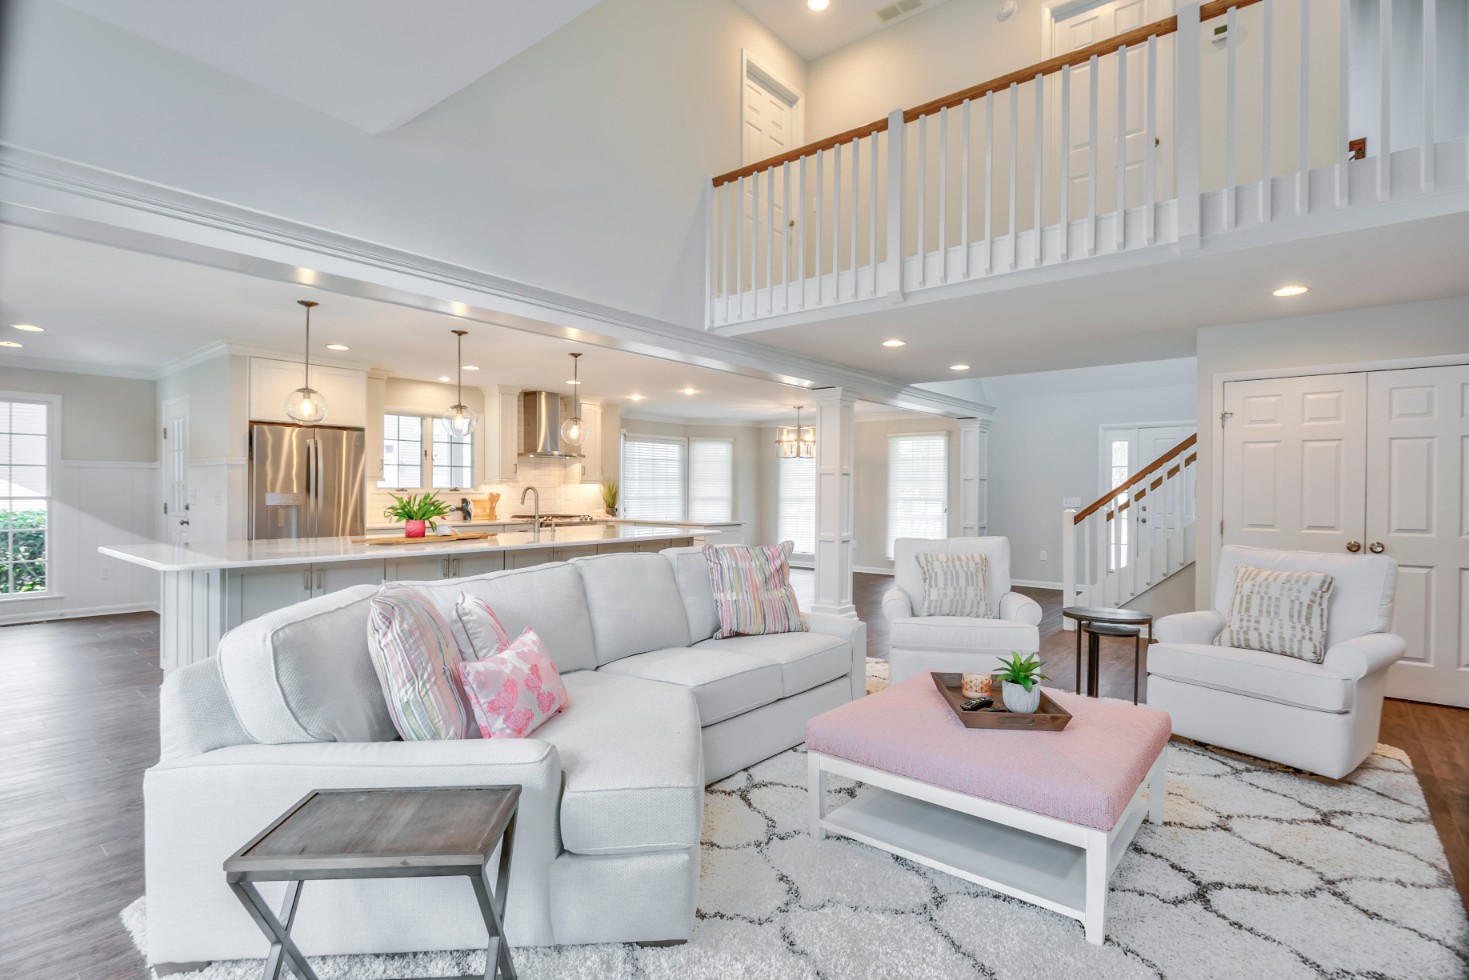 Canal Way Renovation in Bethany Beach DE - Great Room with Beige Sofa and Armchairs